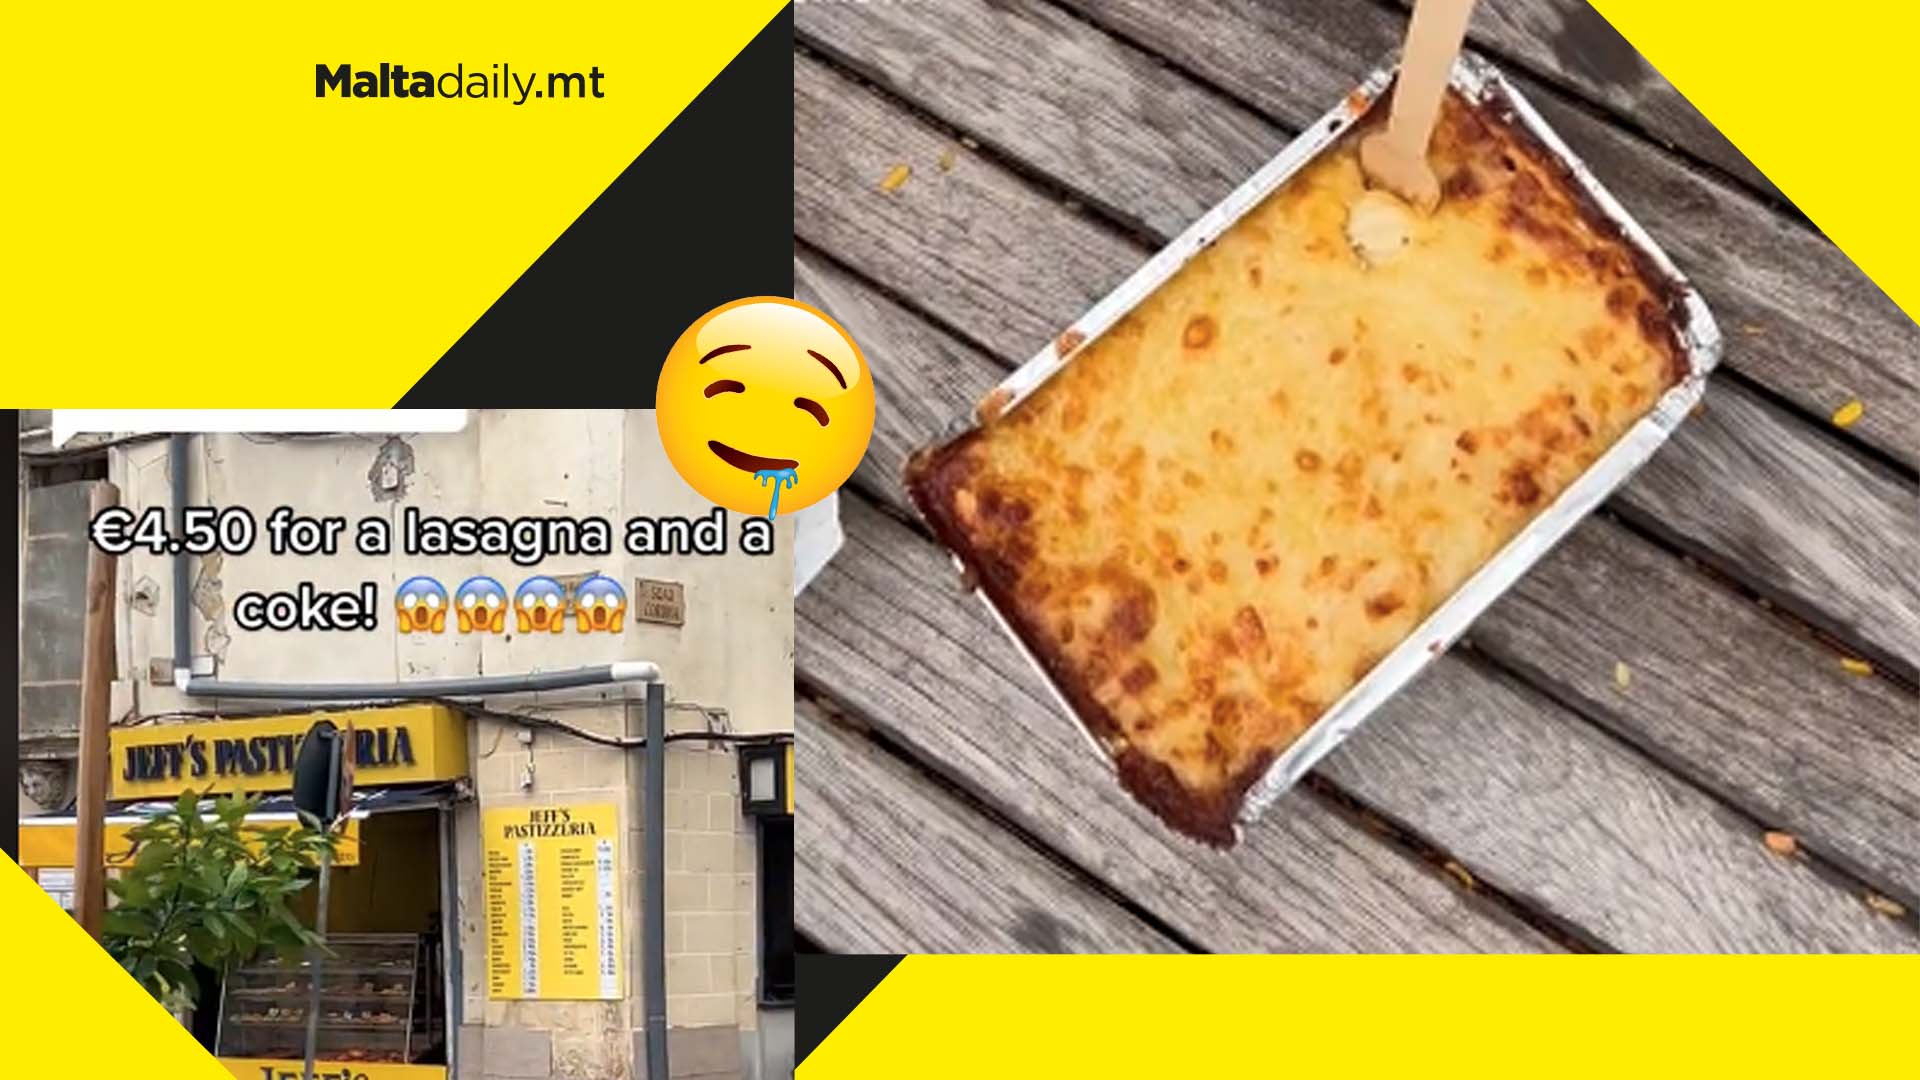 Canadians in Malta amazed by how cheap pastizzeri shops are